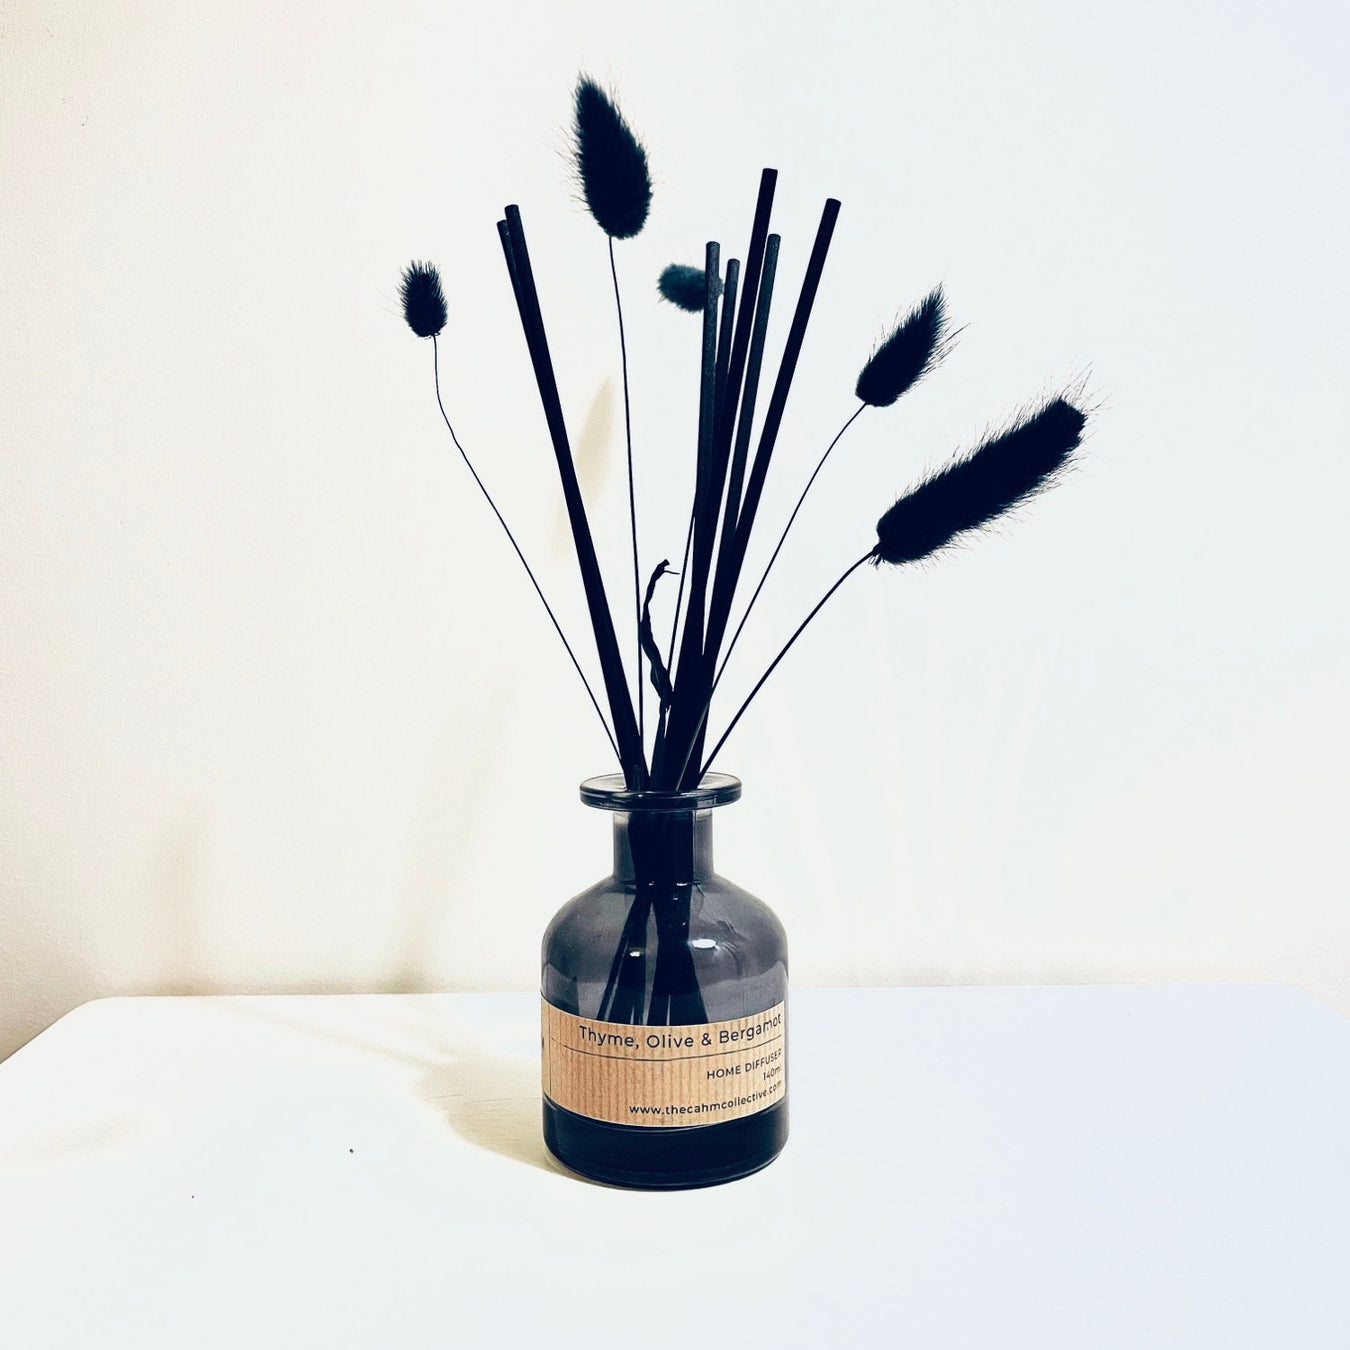 Cahm olive, thyme and bergamot glass reed Diffuser, in black glass vase with black reeds.